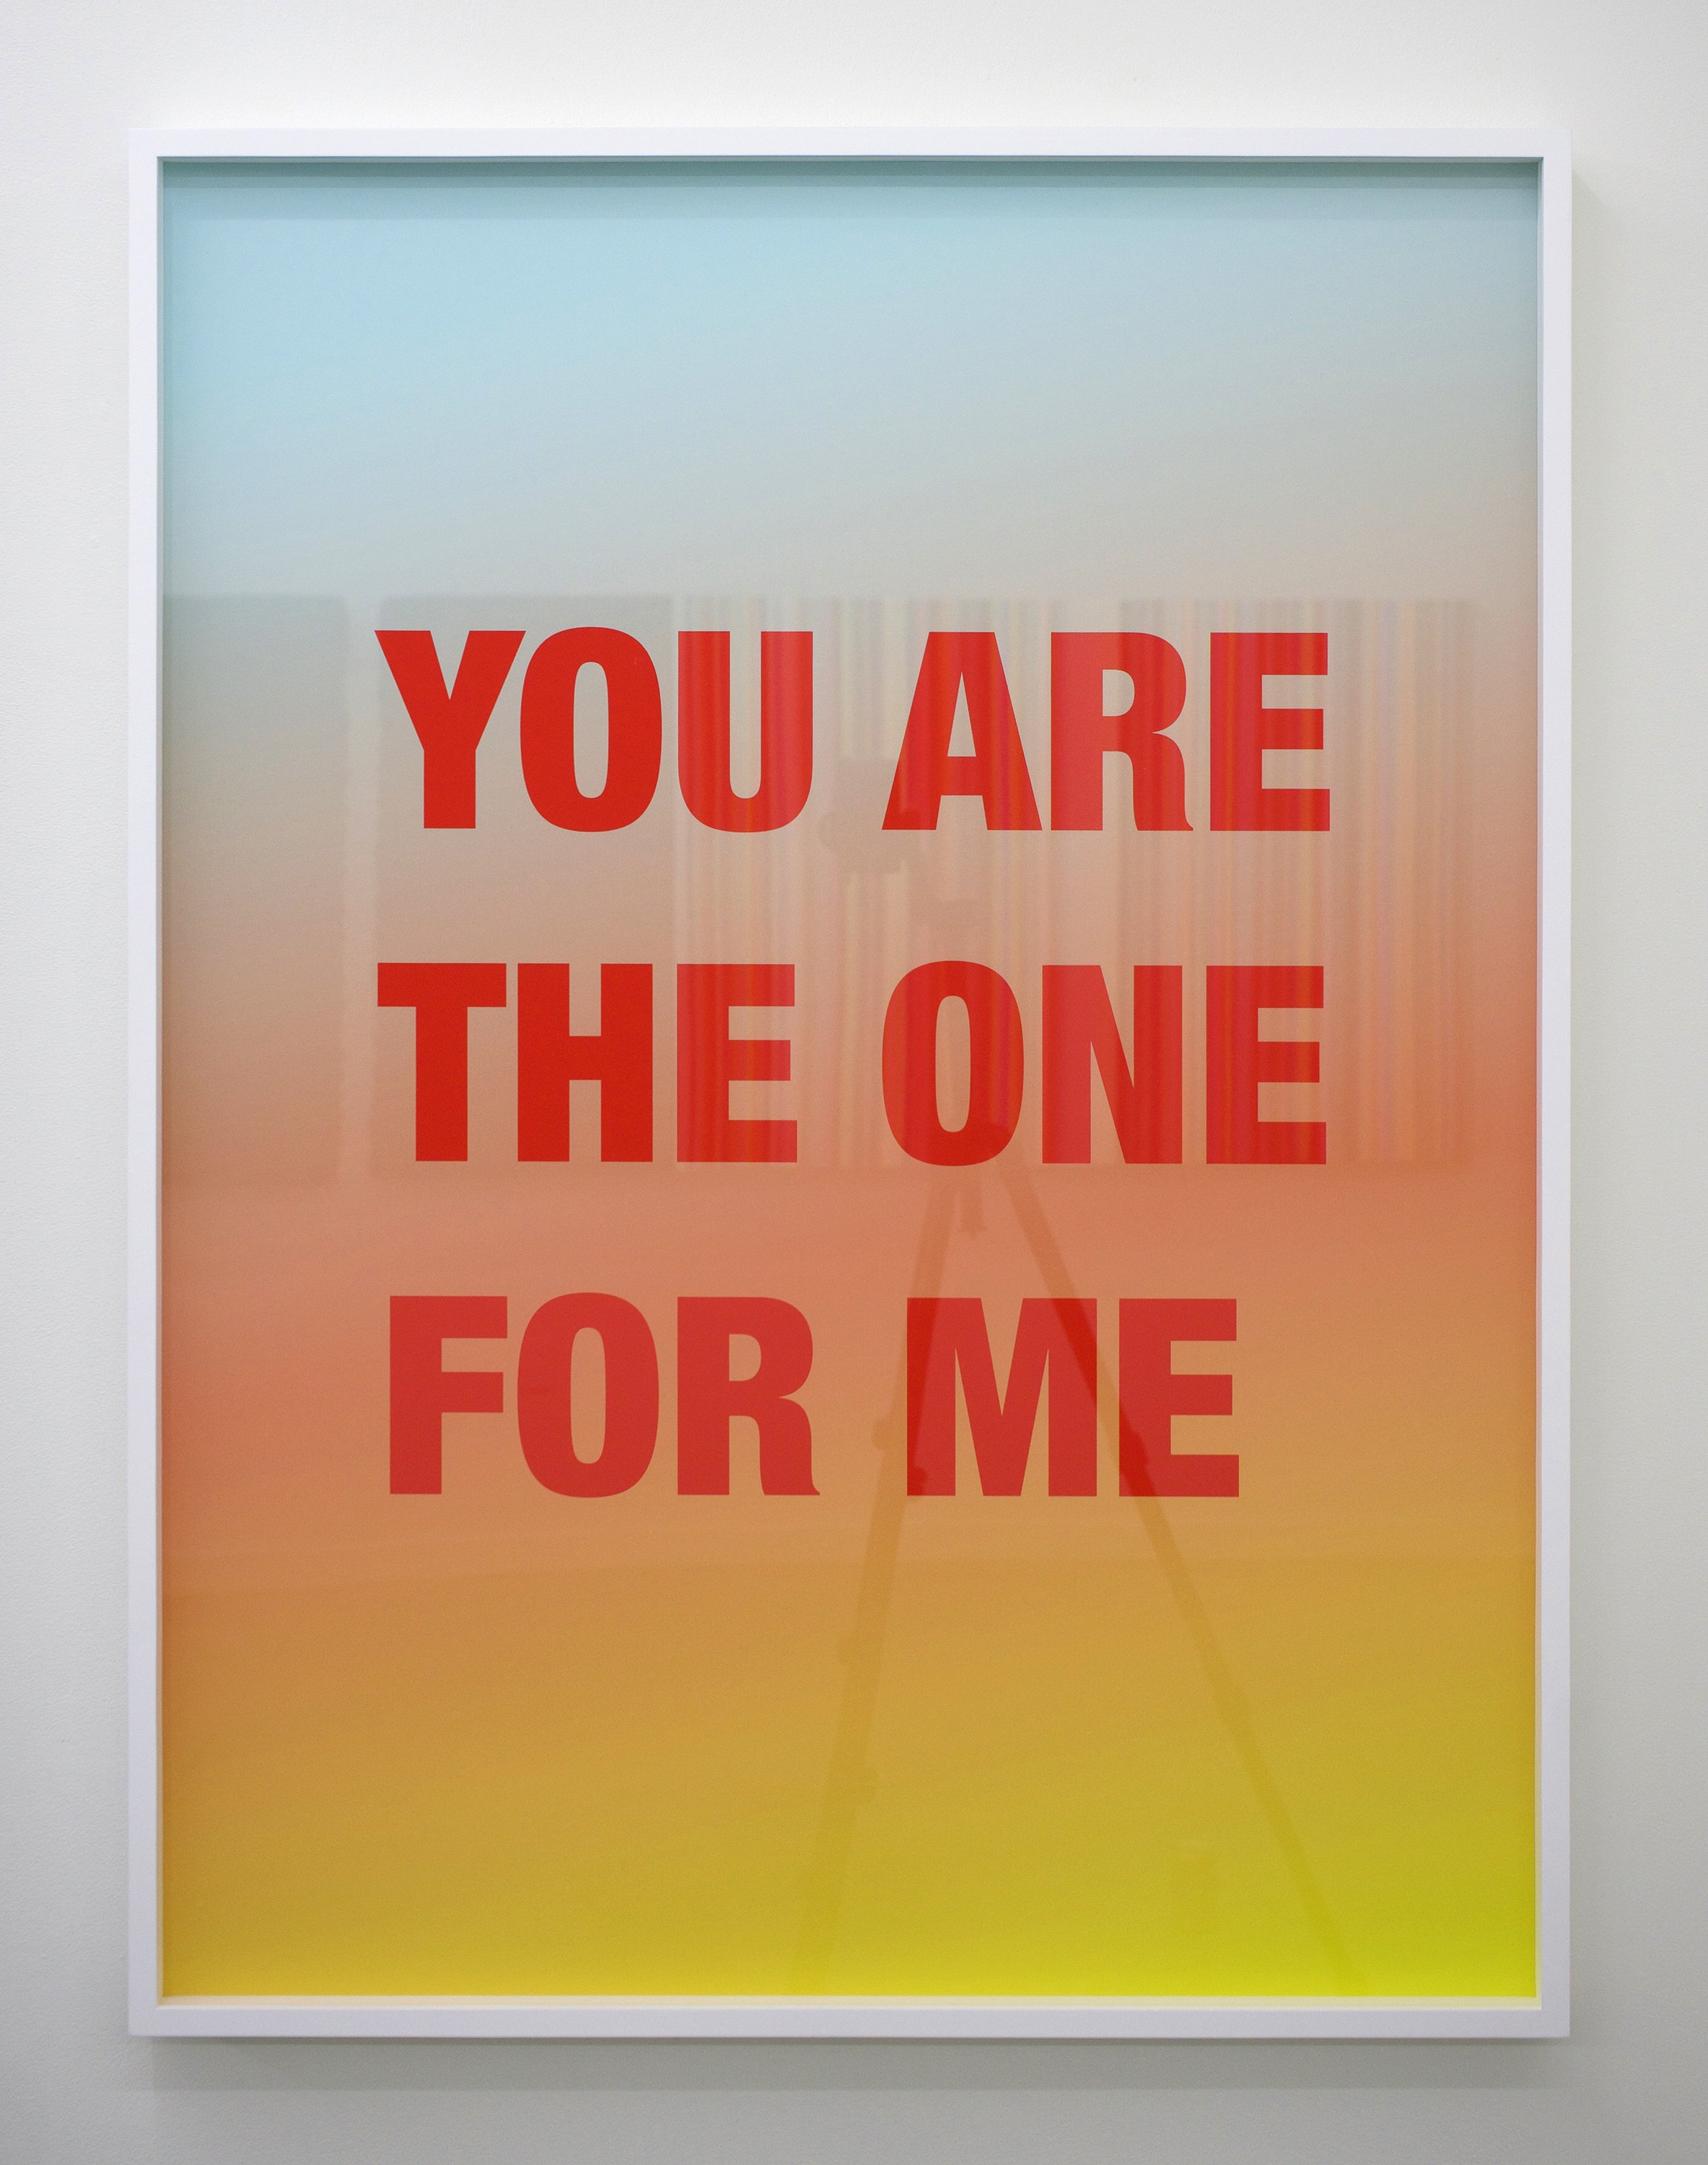  Estate of Susan O'Malley  You Are The One For Me , 2009 digital archival print on Hahnemuhle Ultrasmooth with frame, edition 4/5 40.75" x 30.75" 